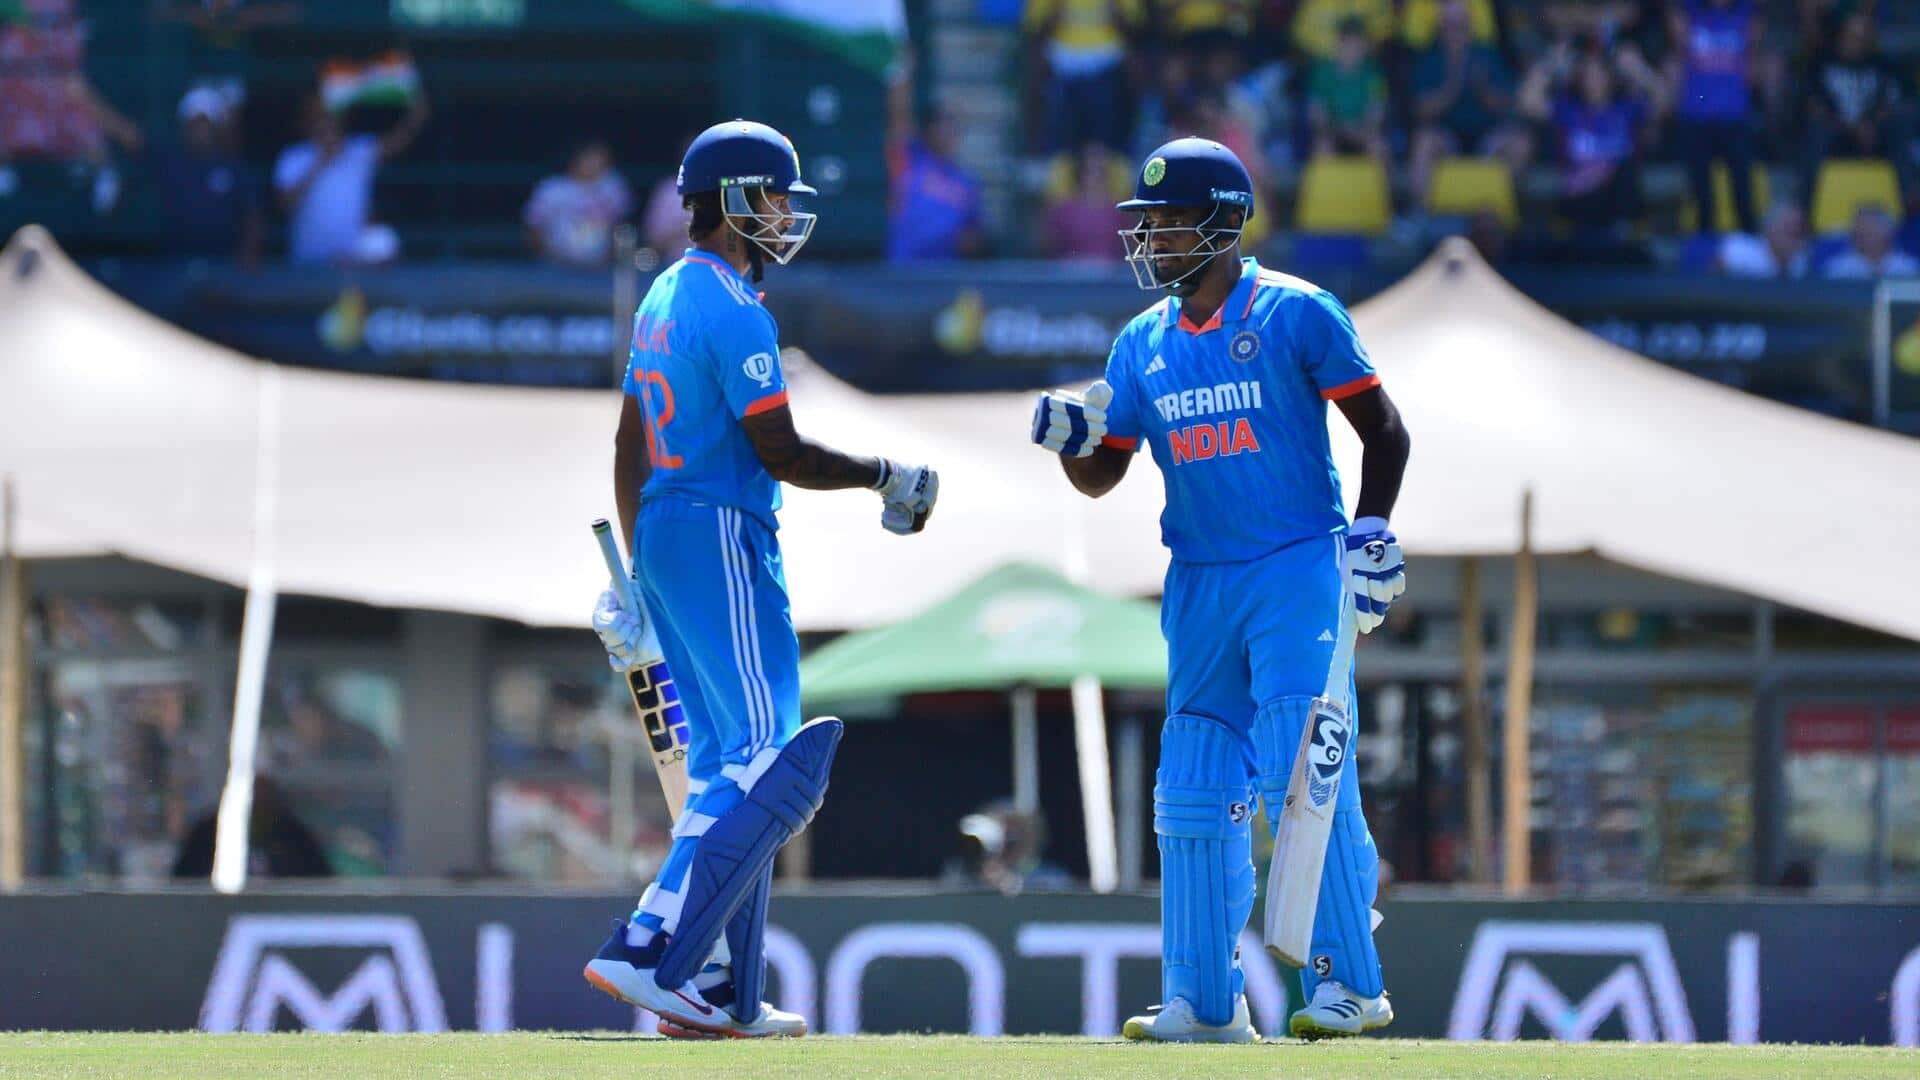 India overcome South Africa in 3rd ODI, seal series: Stats